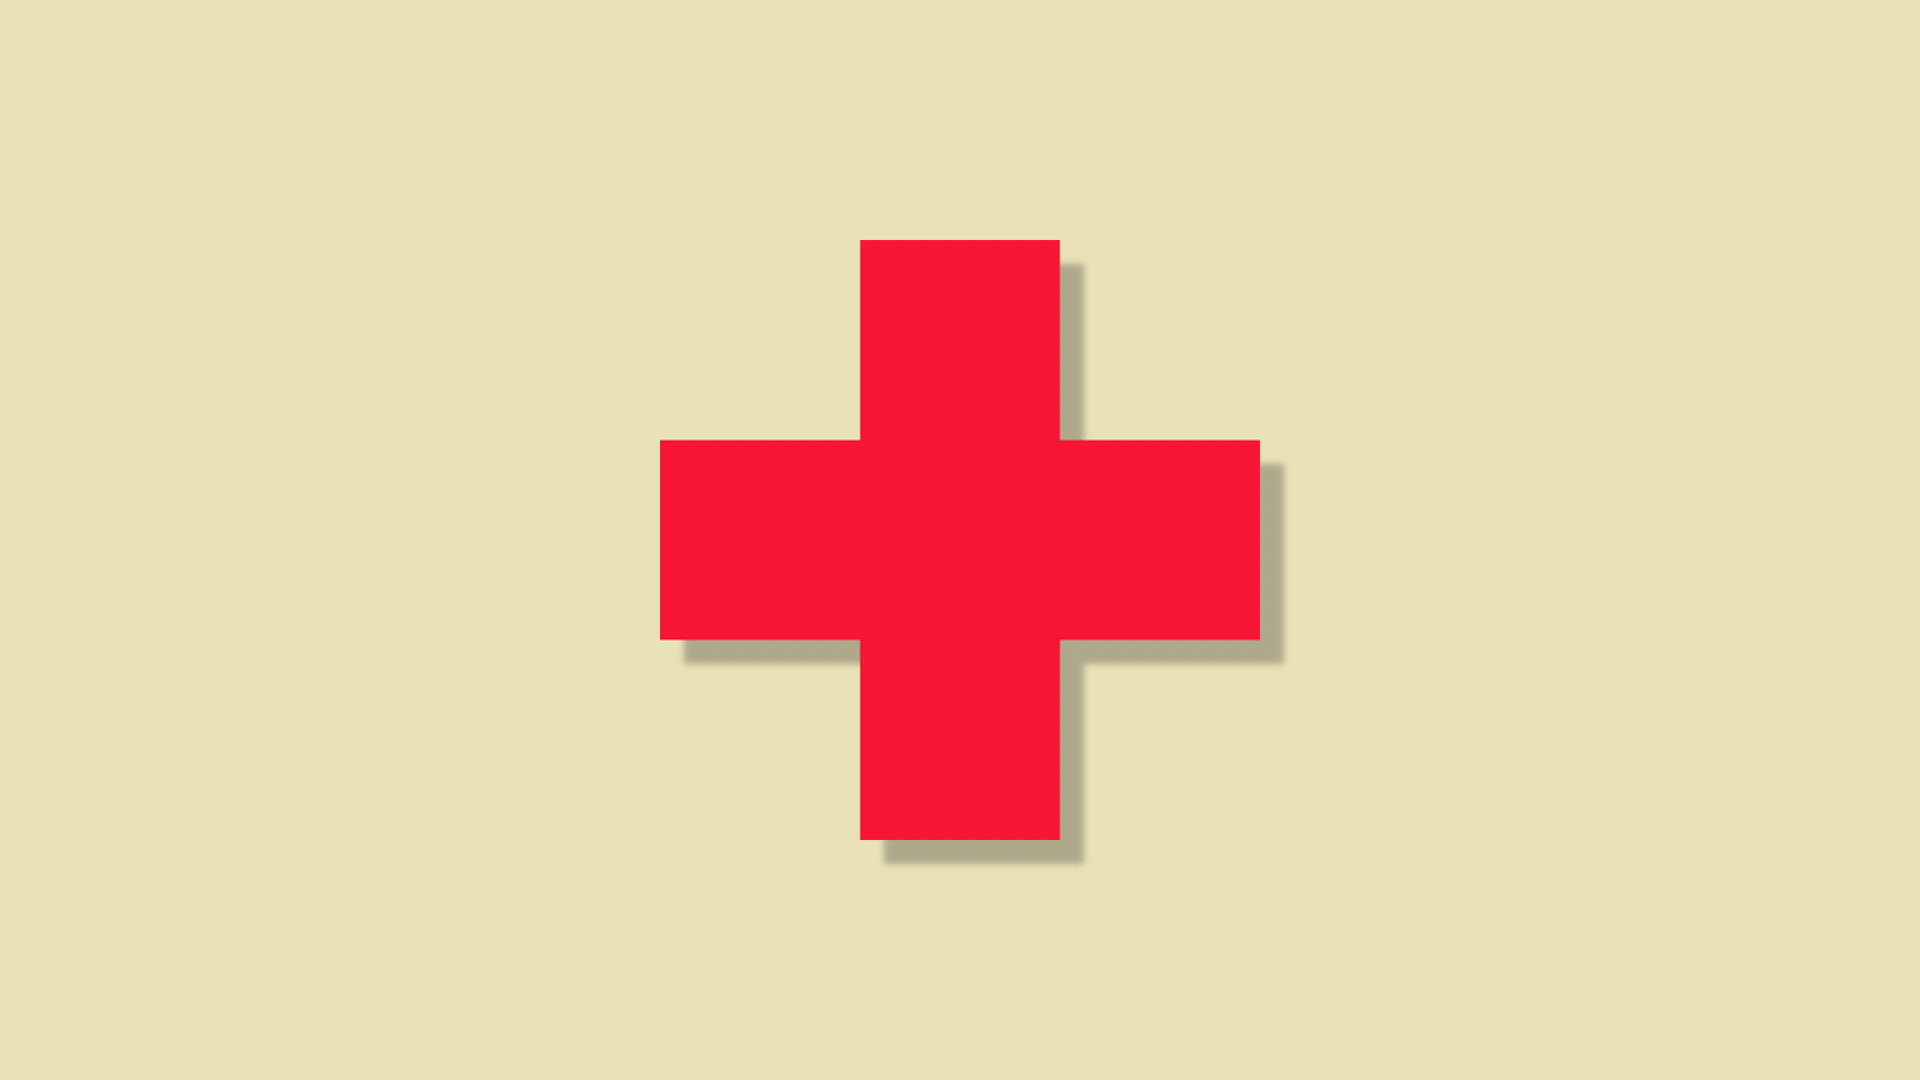 Illustration of a red cross animating into a not equal sign.